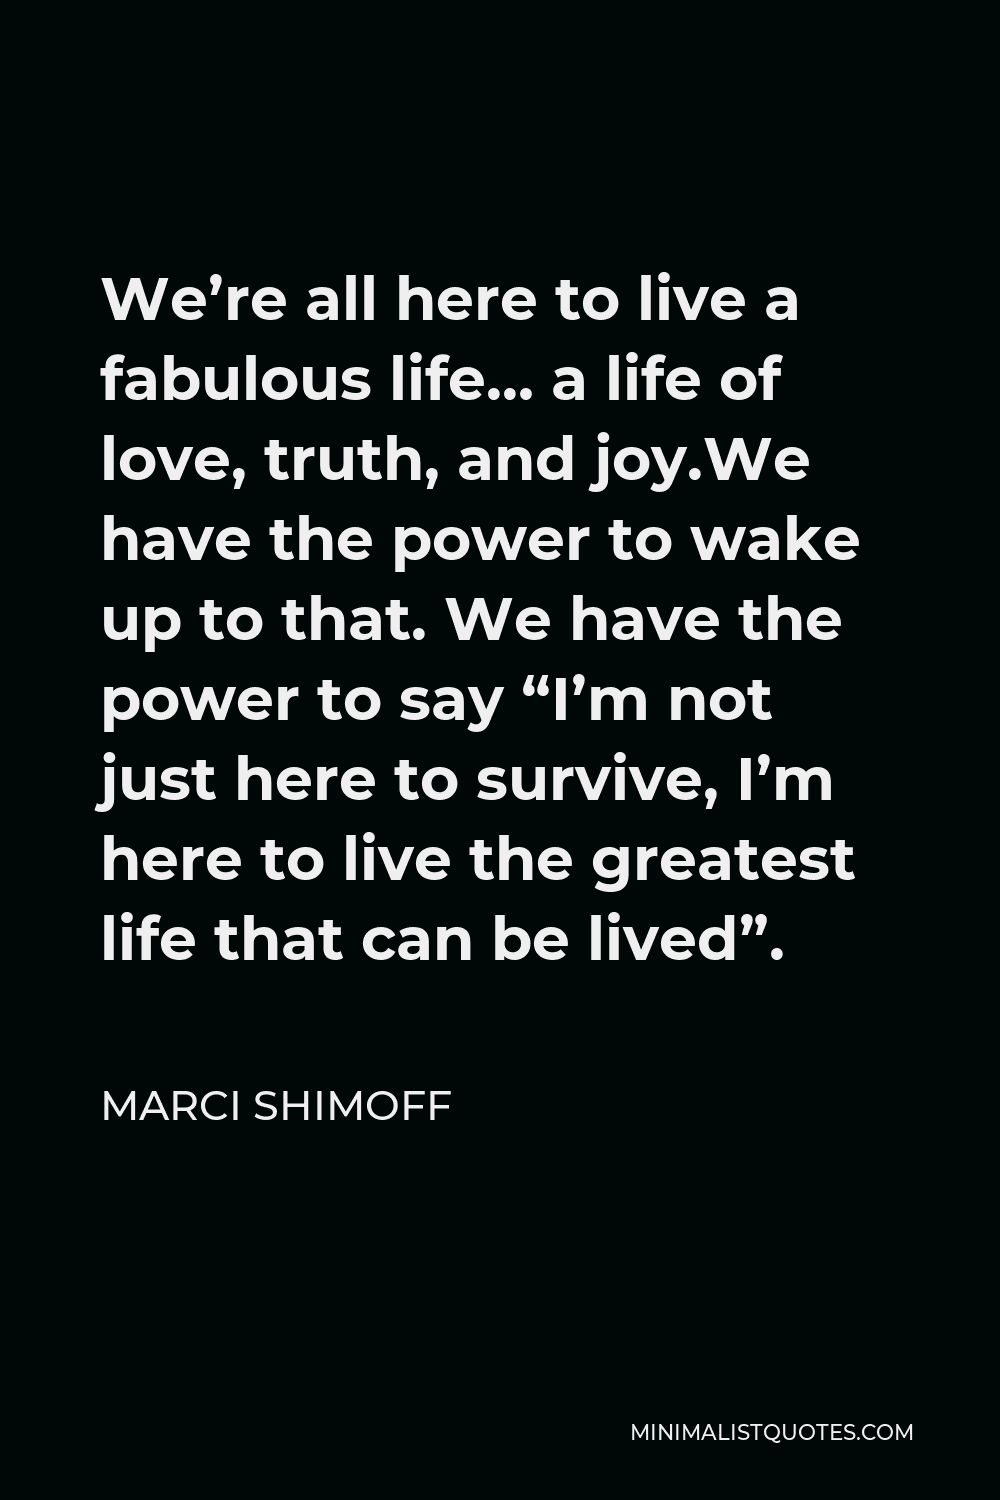 Marci Shimoff Quote - We’re all here to live a fabulous life… a life of love, truth, and joy.We have the power to wake up to that. We have the power to say “I’m not just here to survive, I’m here to live the greatest life that can be lived”.